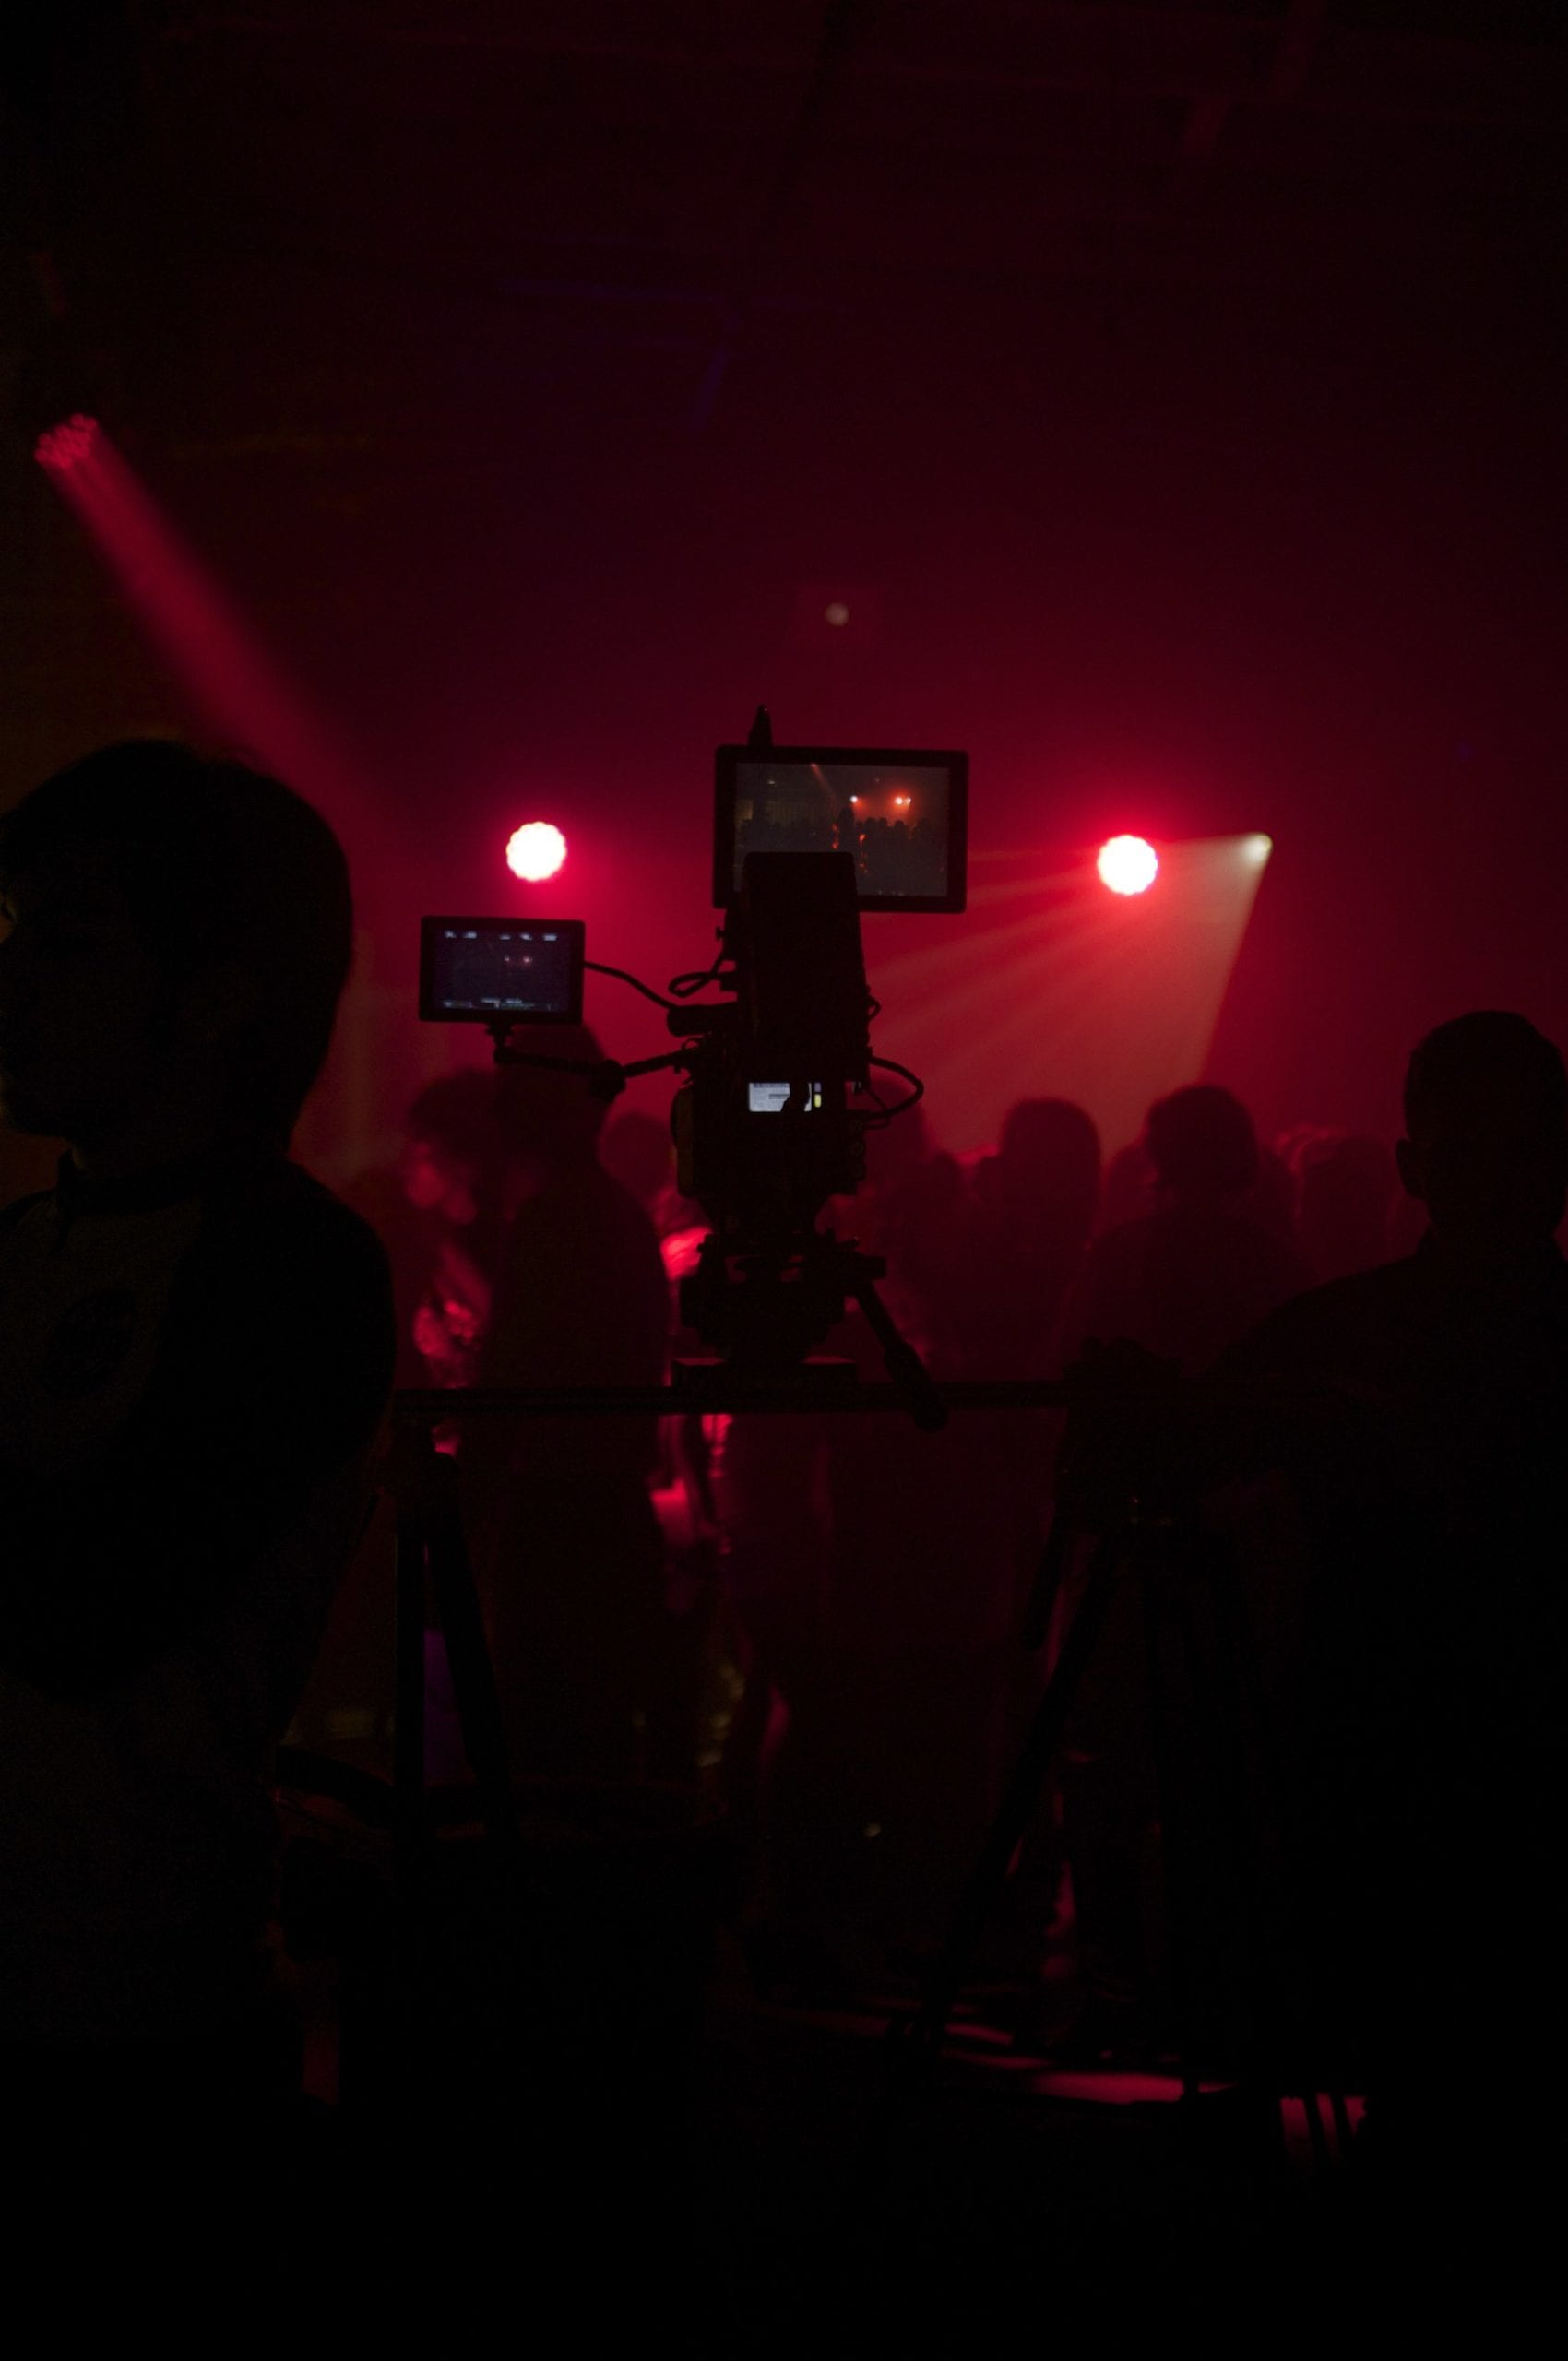 View from behind silhouette of two video camera operators filming a concert basked in red light